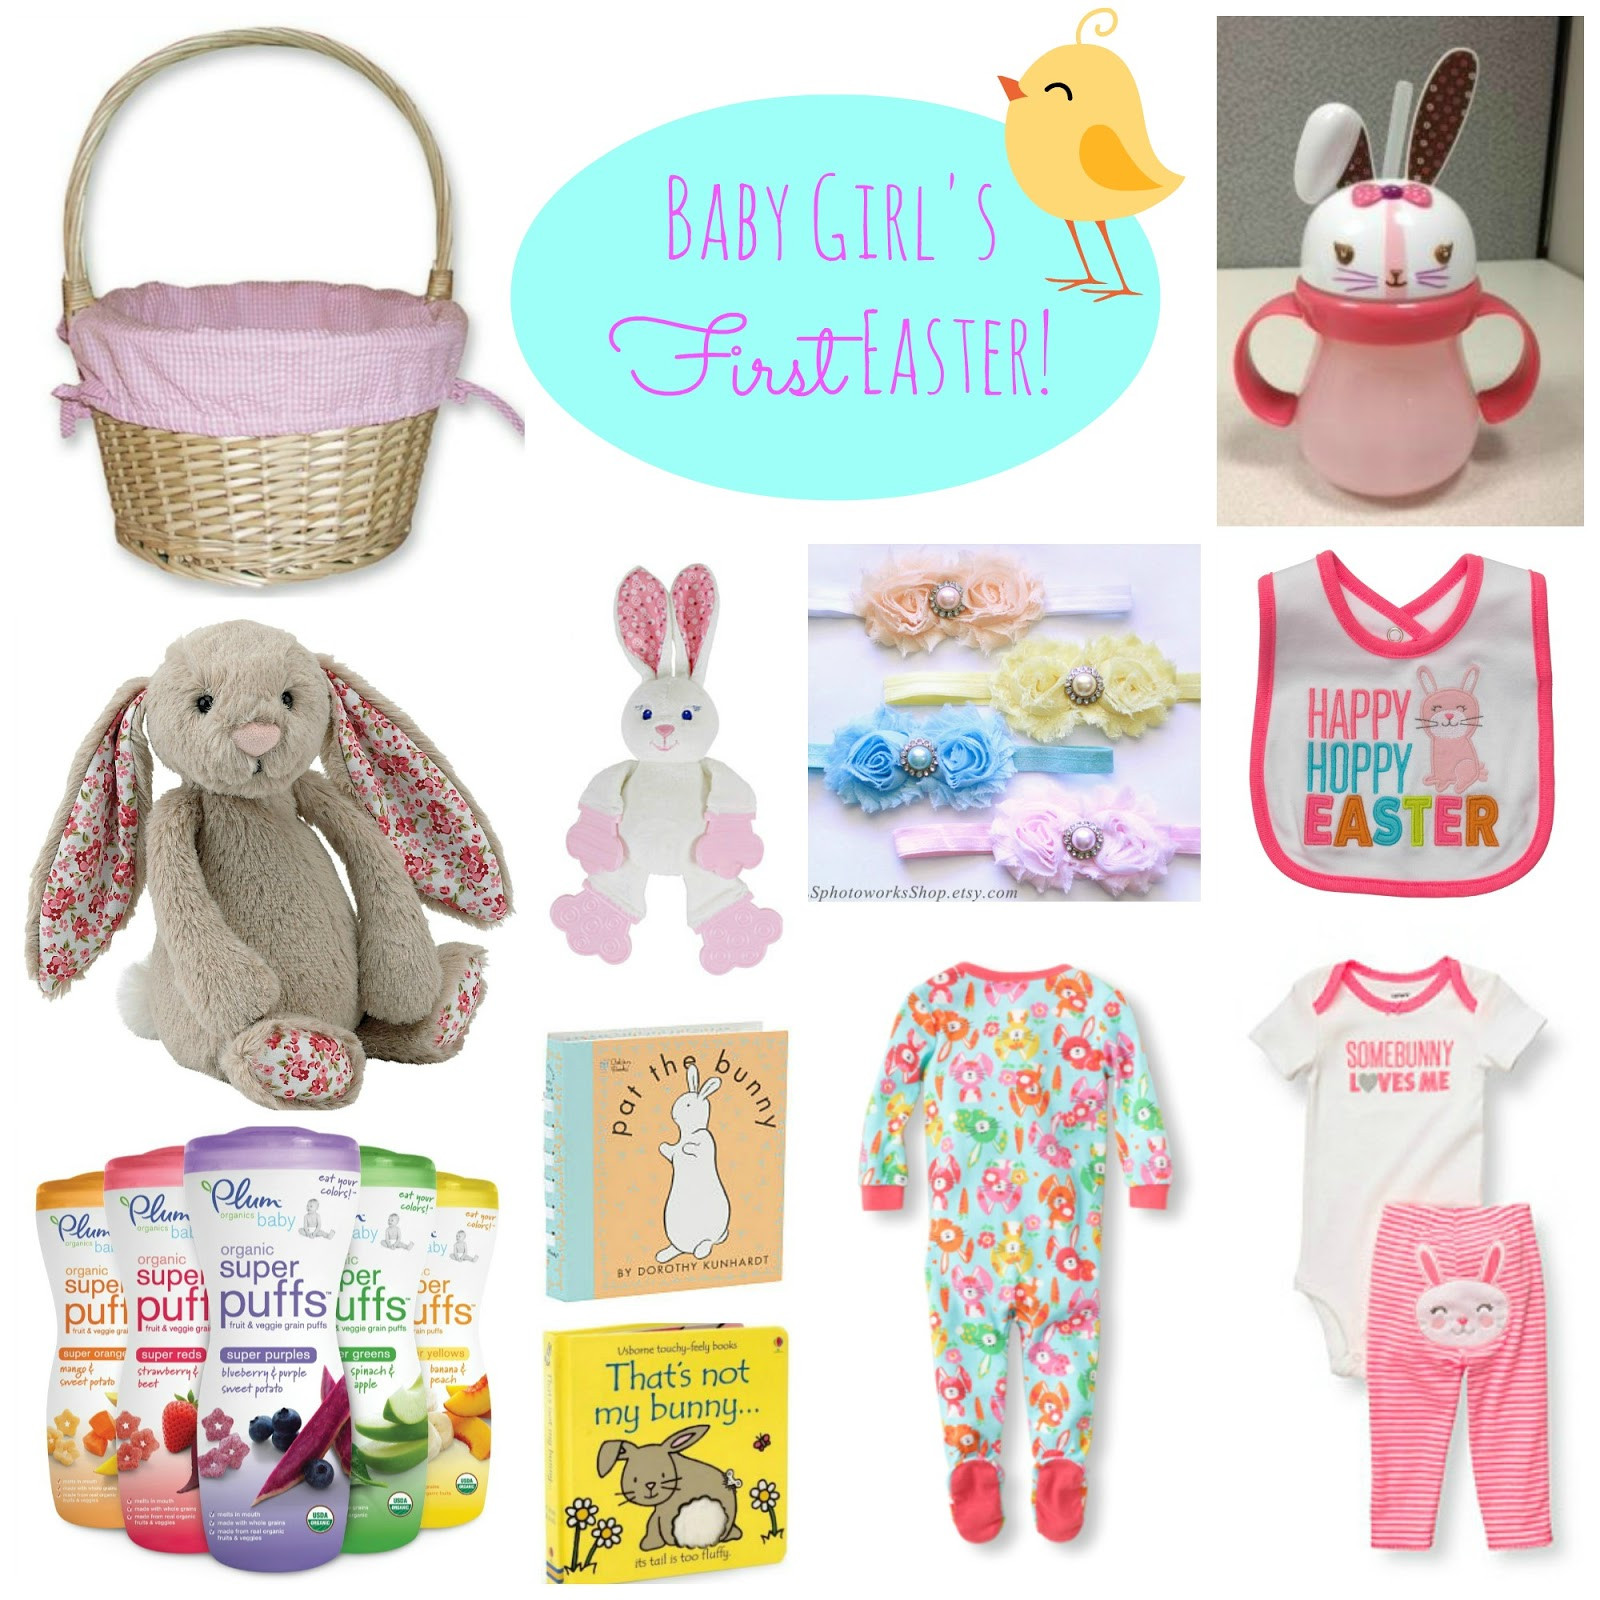 Gift Ideas For Baby'S First Easter
 Simple Suburbia Baby s First Easter Basket Ideas